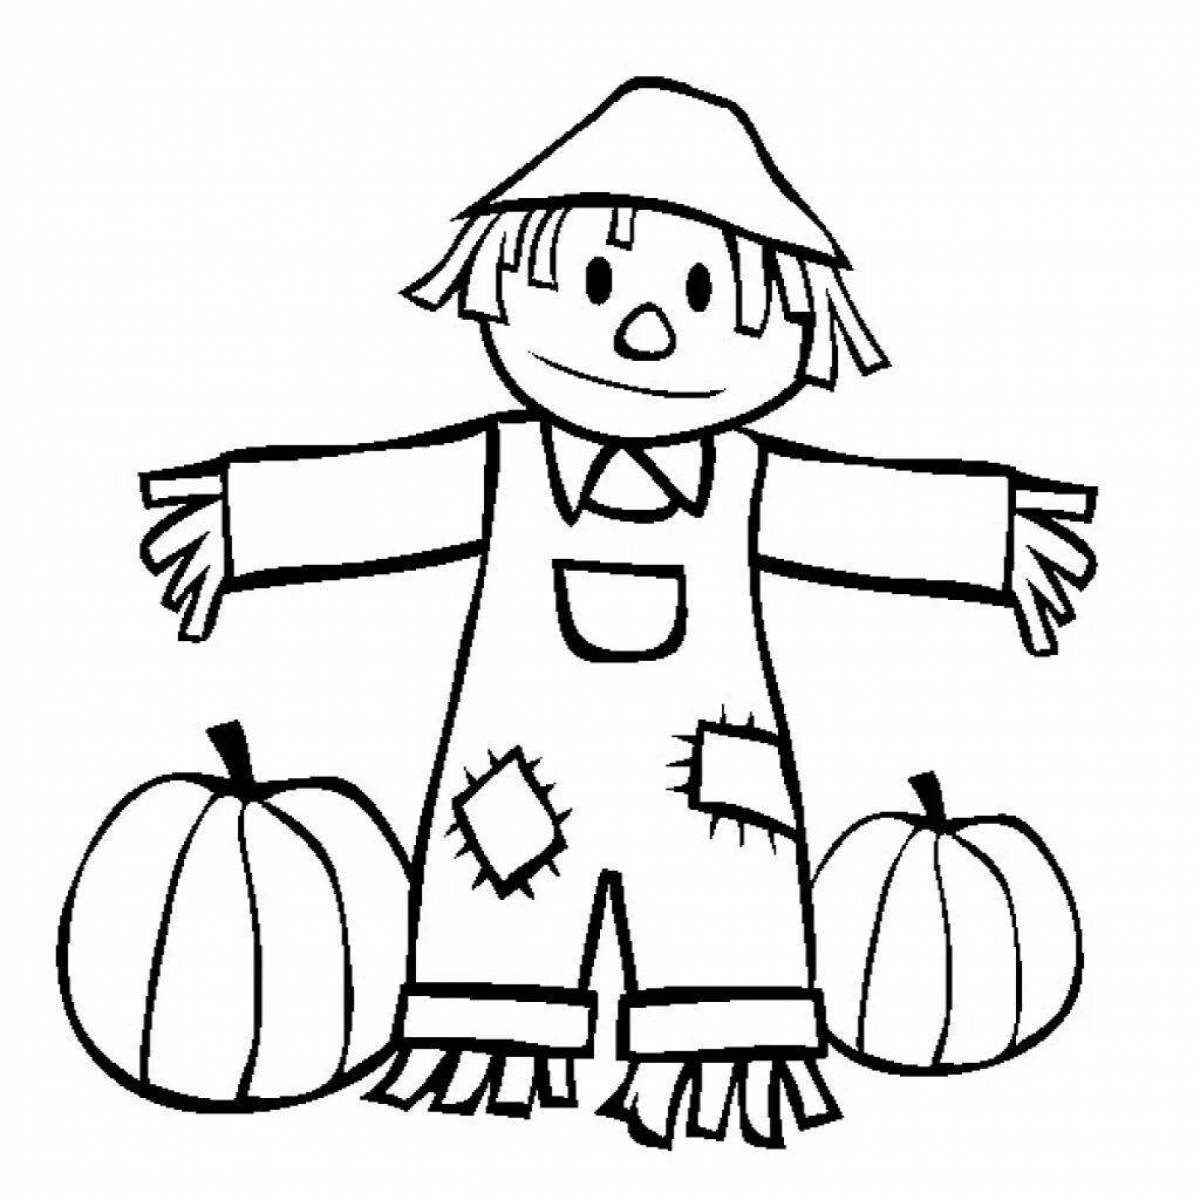 Coloring page adorable scarecrow